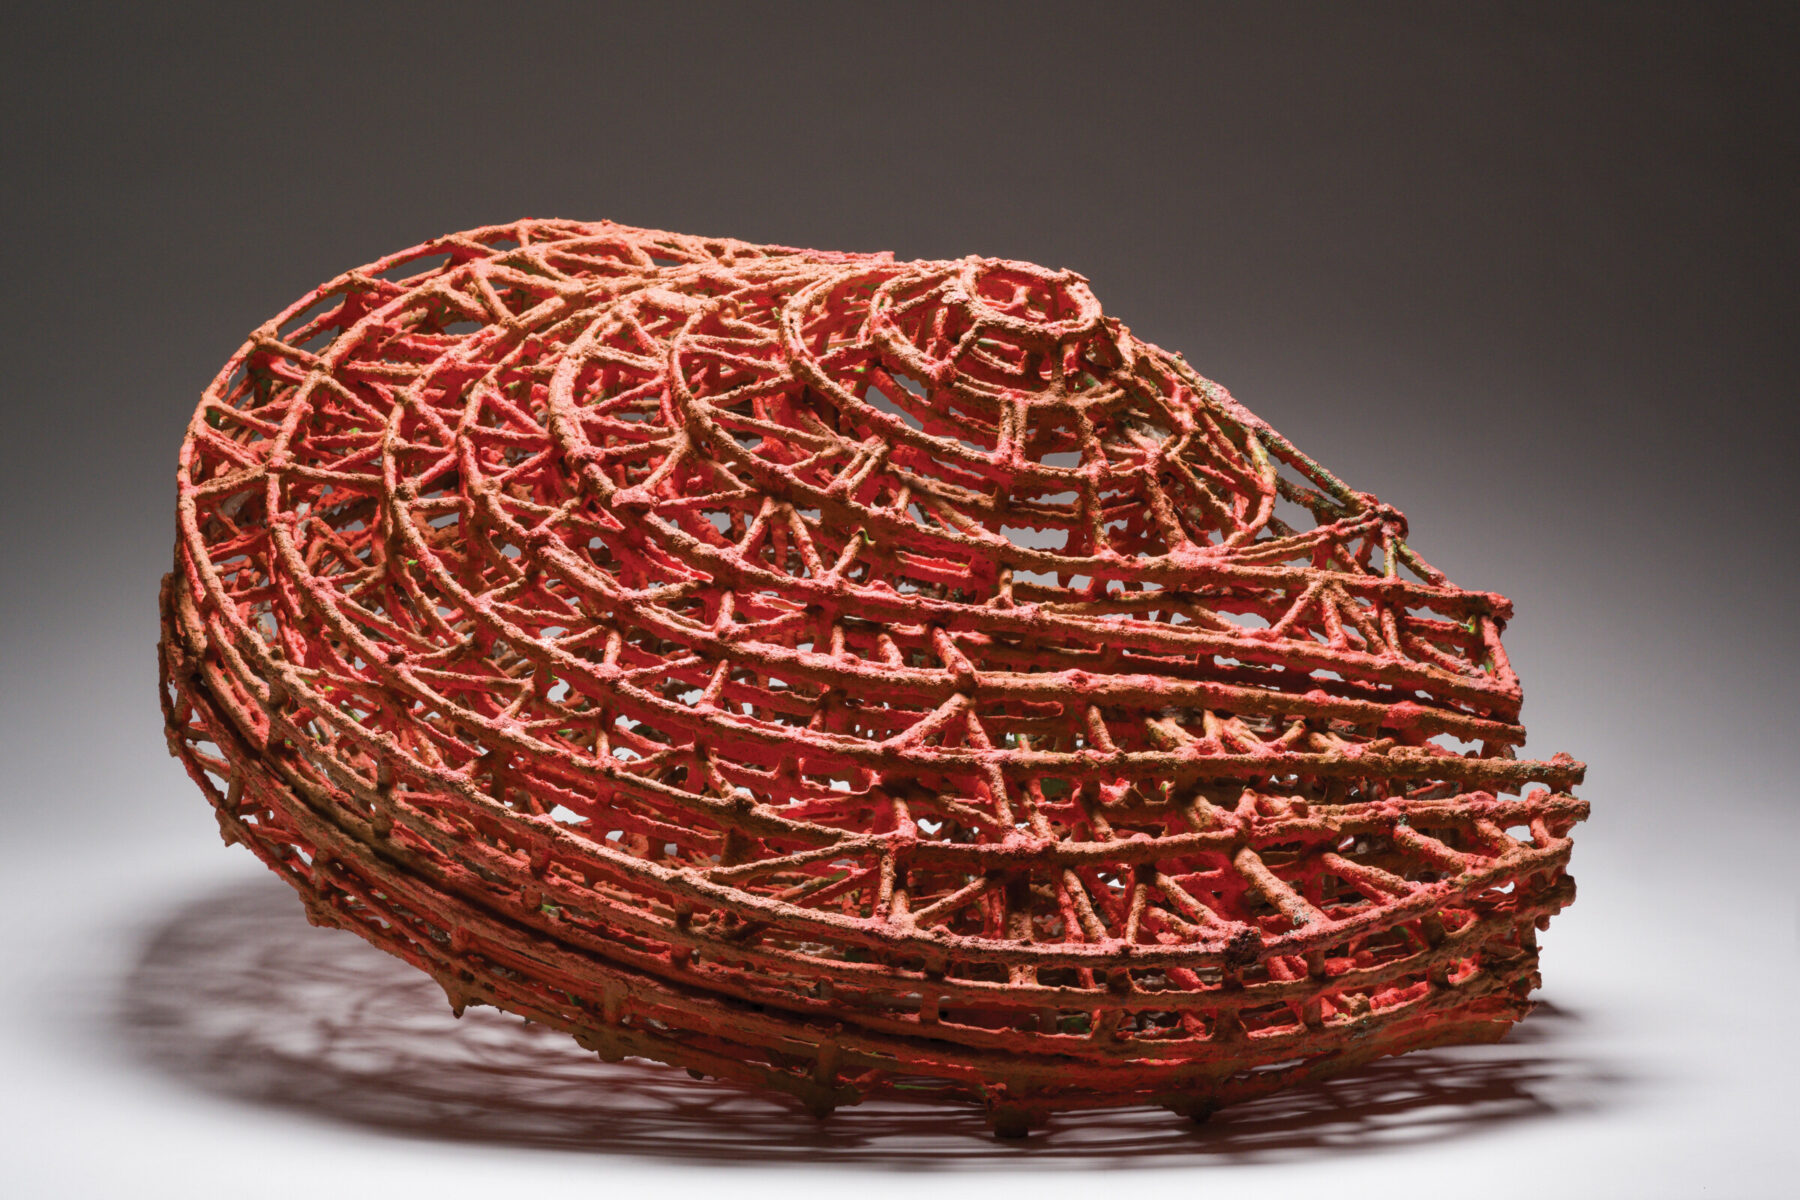 STEPHEN TALASNIK, Leaning Globe, 1998 - 2023; Painted basswood with metallic pigment,
28 x 40 x 22 inches (h x w x d)”